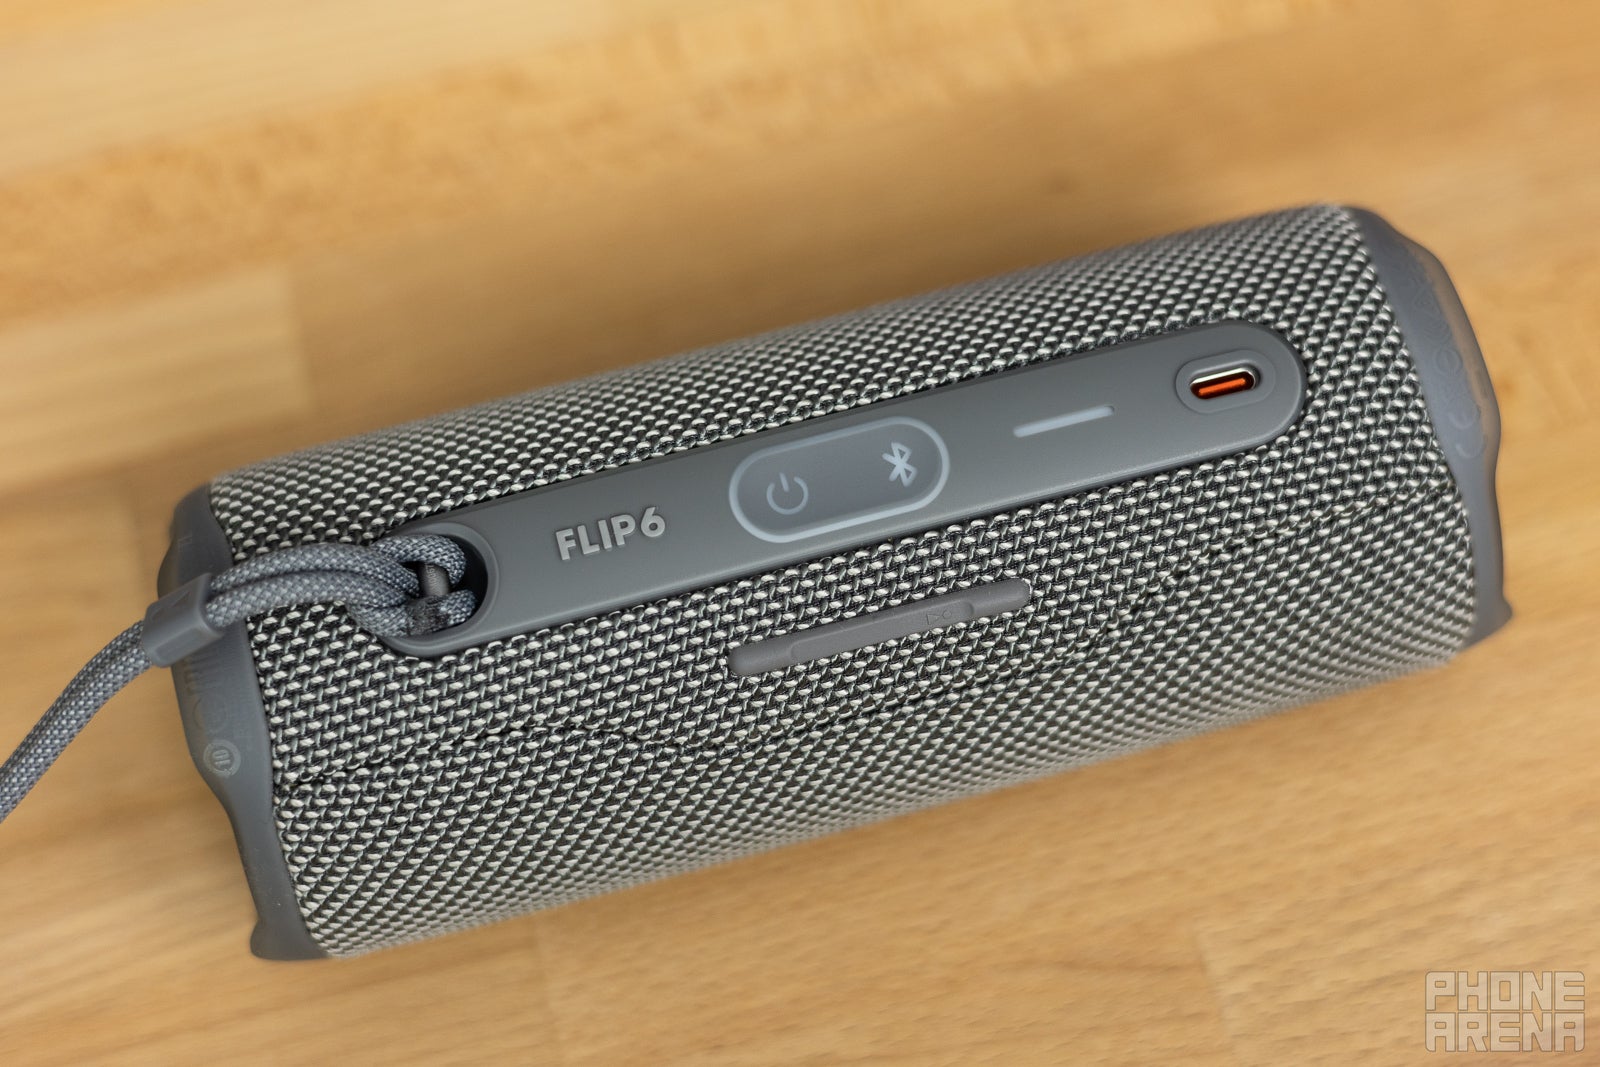 JBL Flip 5 using USB C to AUX adapter] is it possible to use a